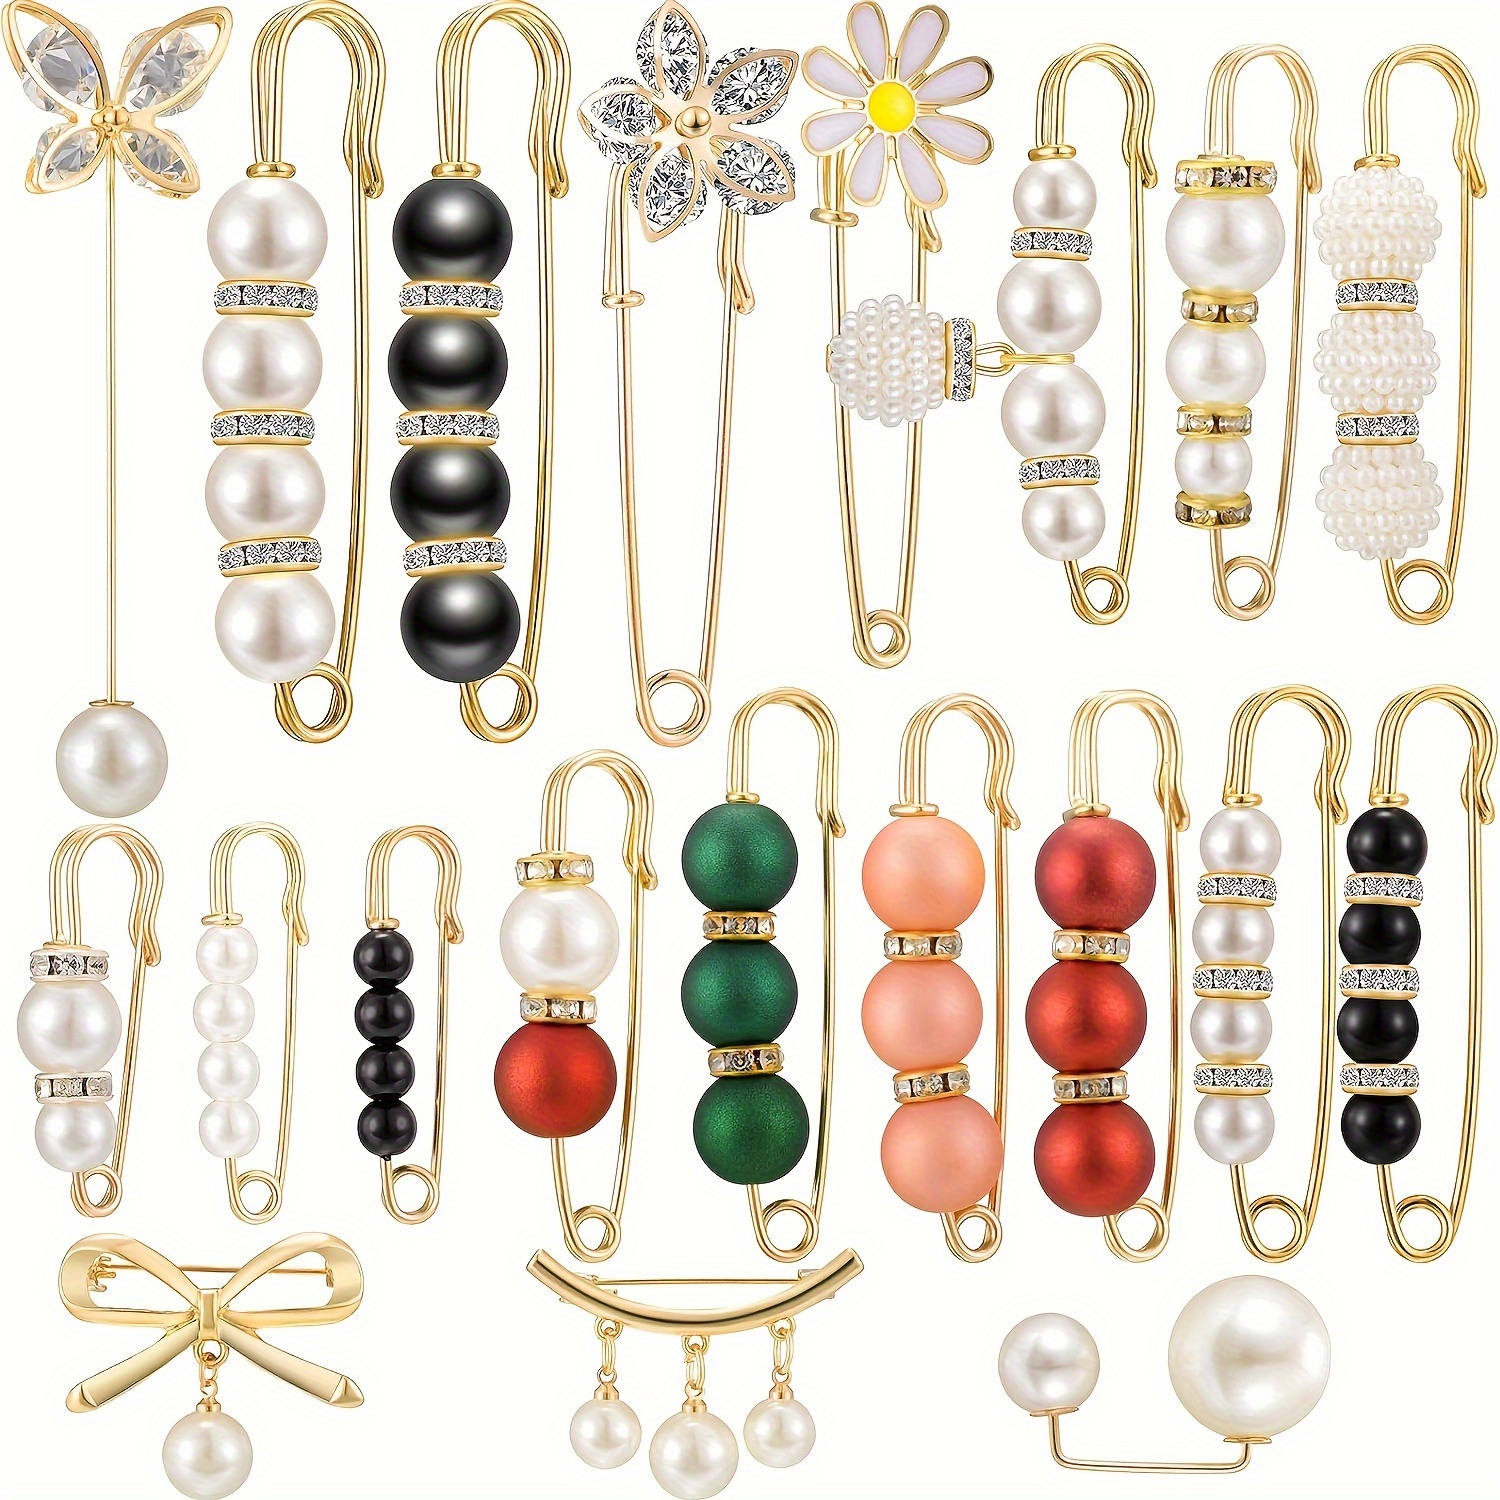 

20pcs Mixed Color Safety Pins Set - Adjustable Waist Tighteners, Non-piercing Secure Clip, Dress Pant Leg Shrinks, Prevent Exposure Clasp, Fashion Accessory Pins For Clothing Tailoring And Decoration